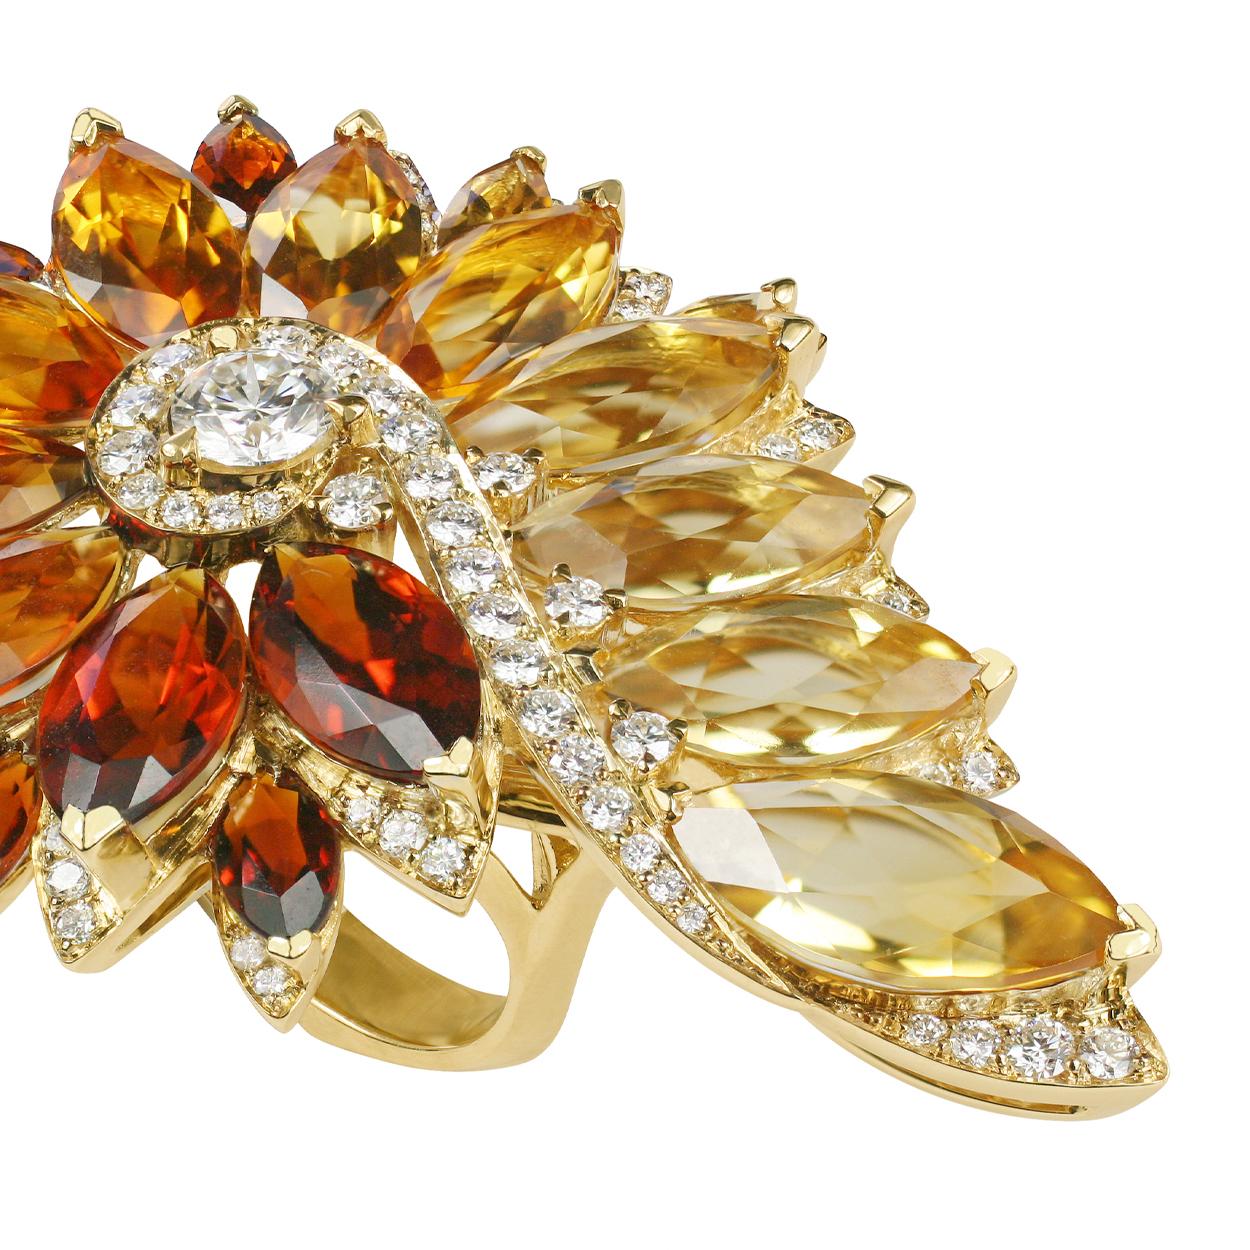 Mixed Cut Stephen Webster Magnipheasant Citrine and White Diamond Feathers Cocktail Ring